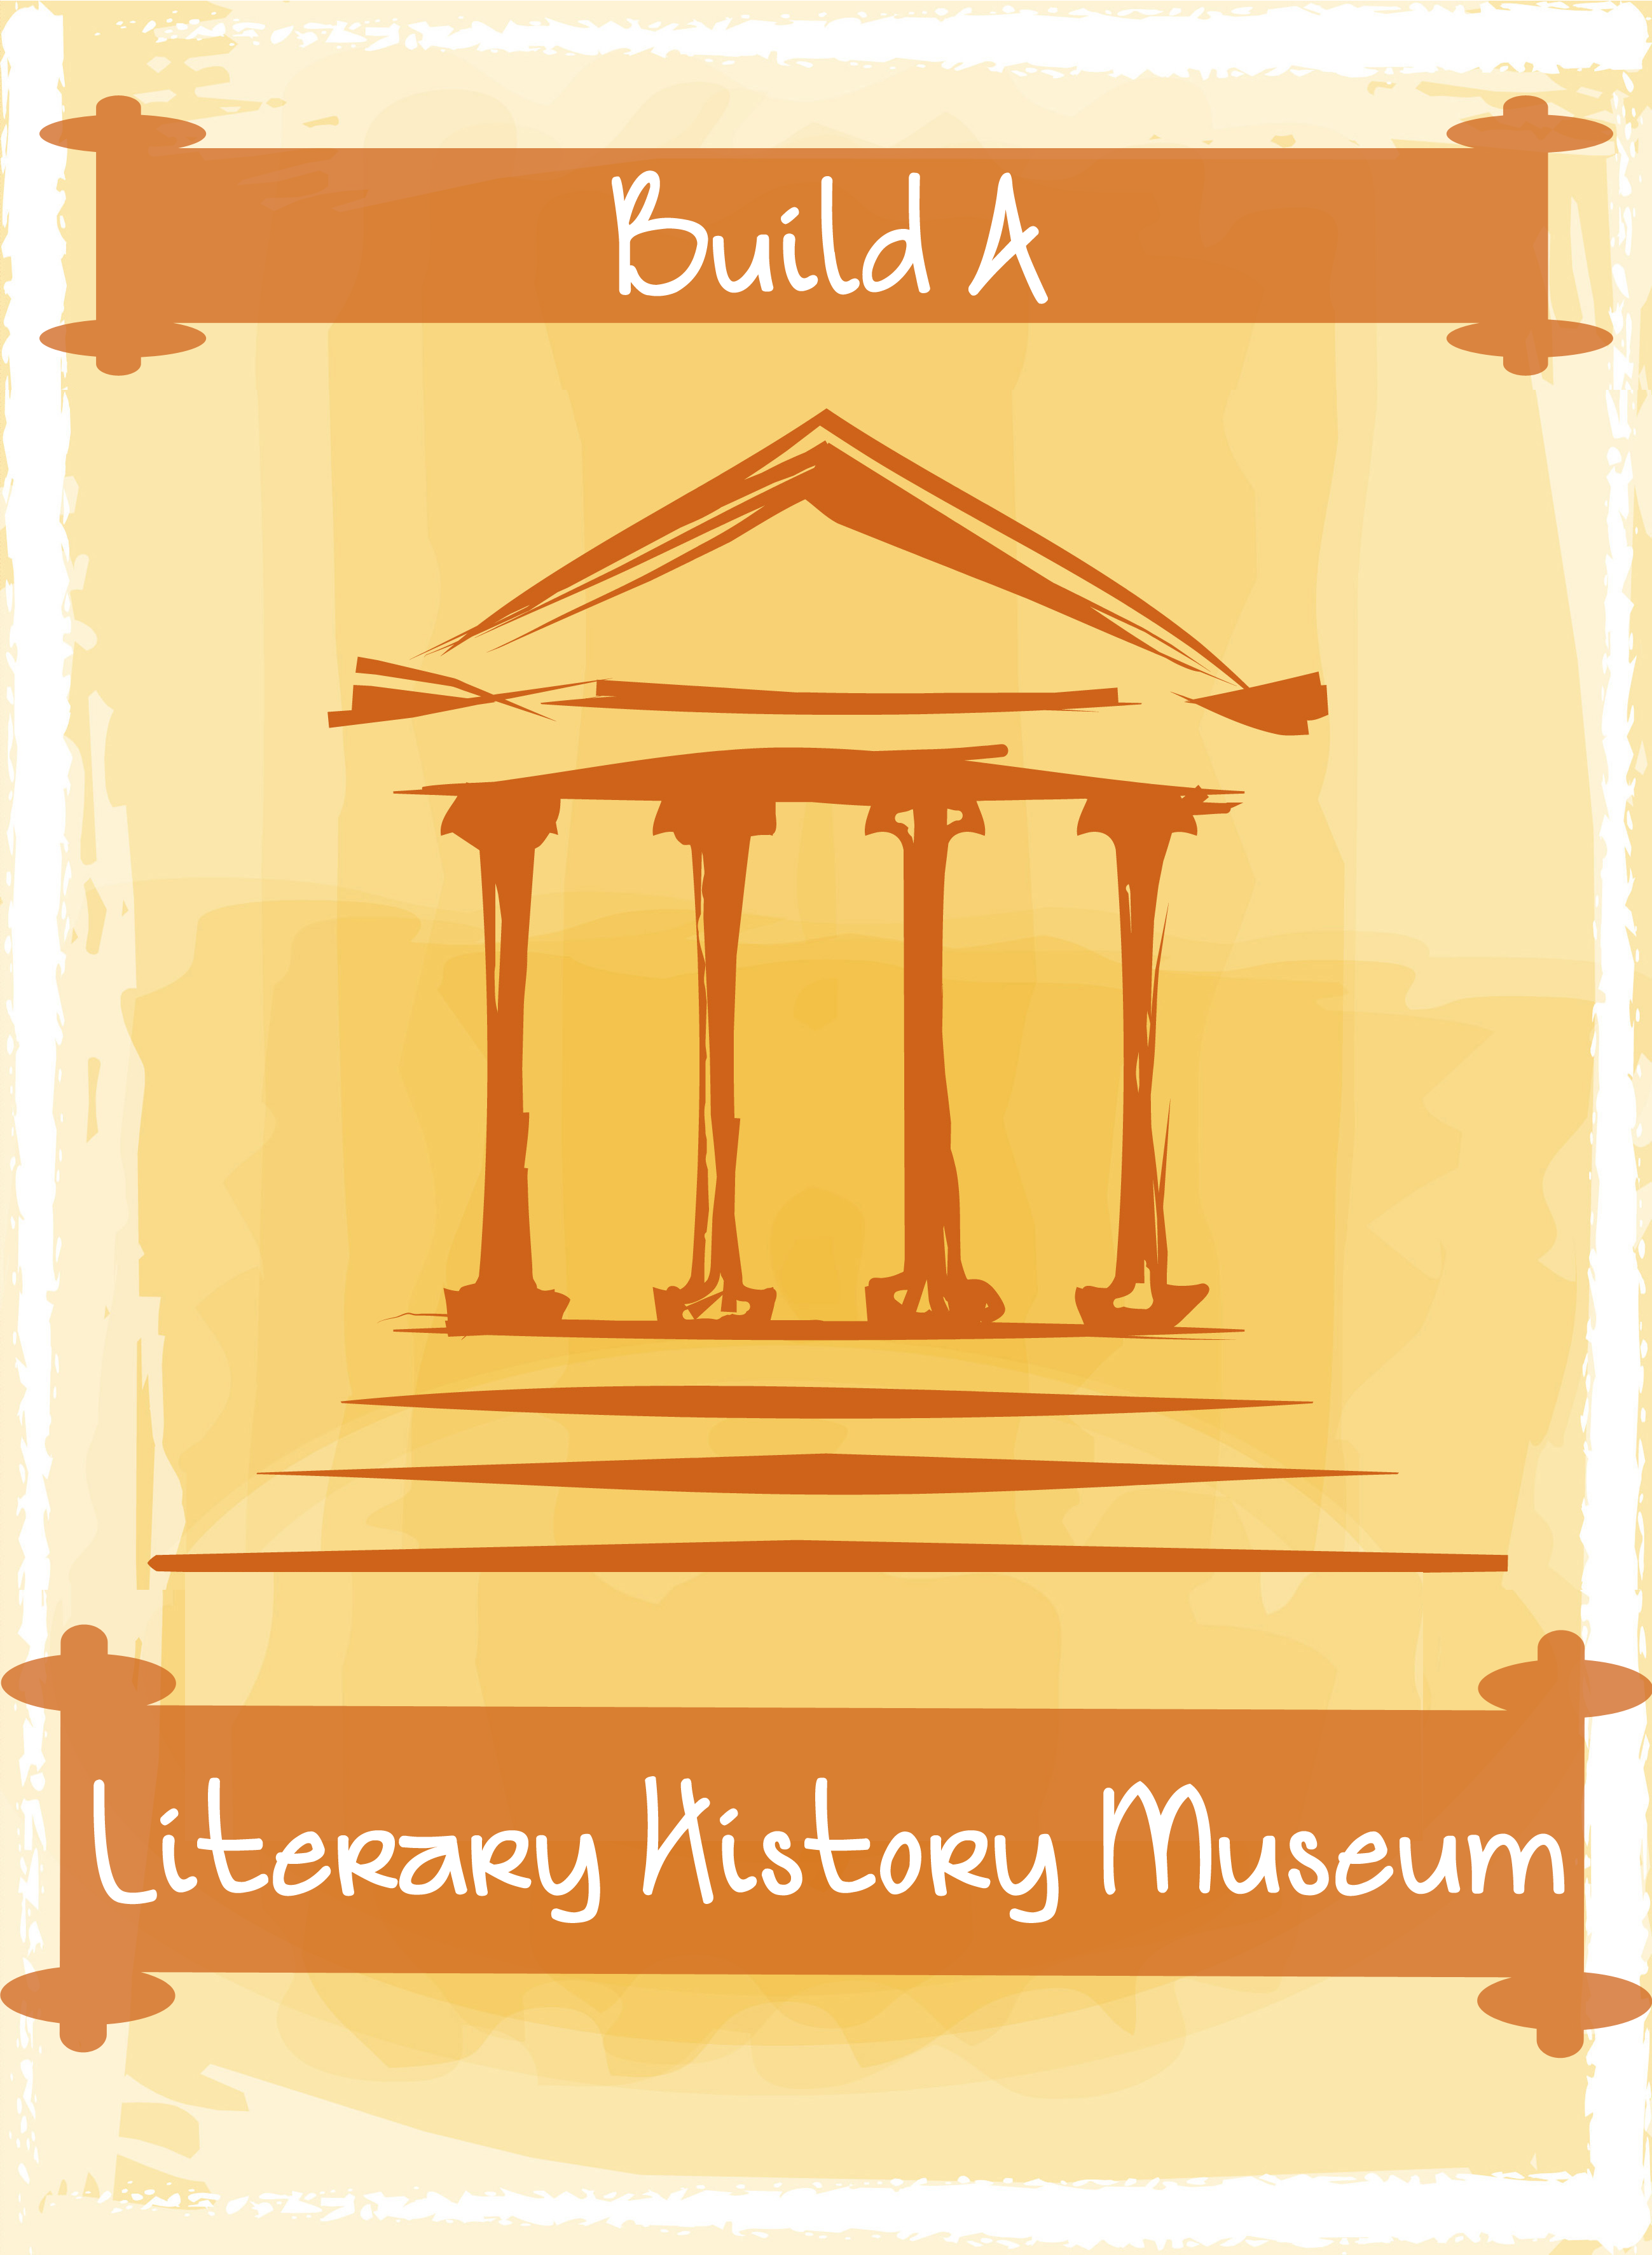 Literary History Timeline – Build a Museum